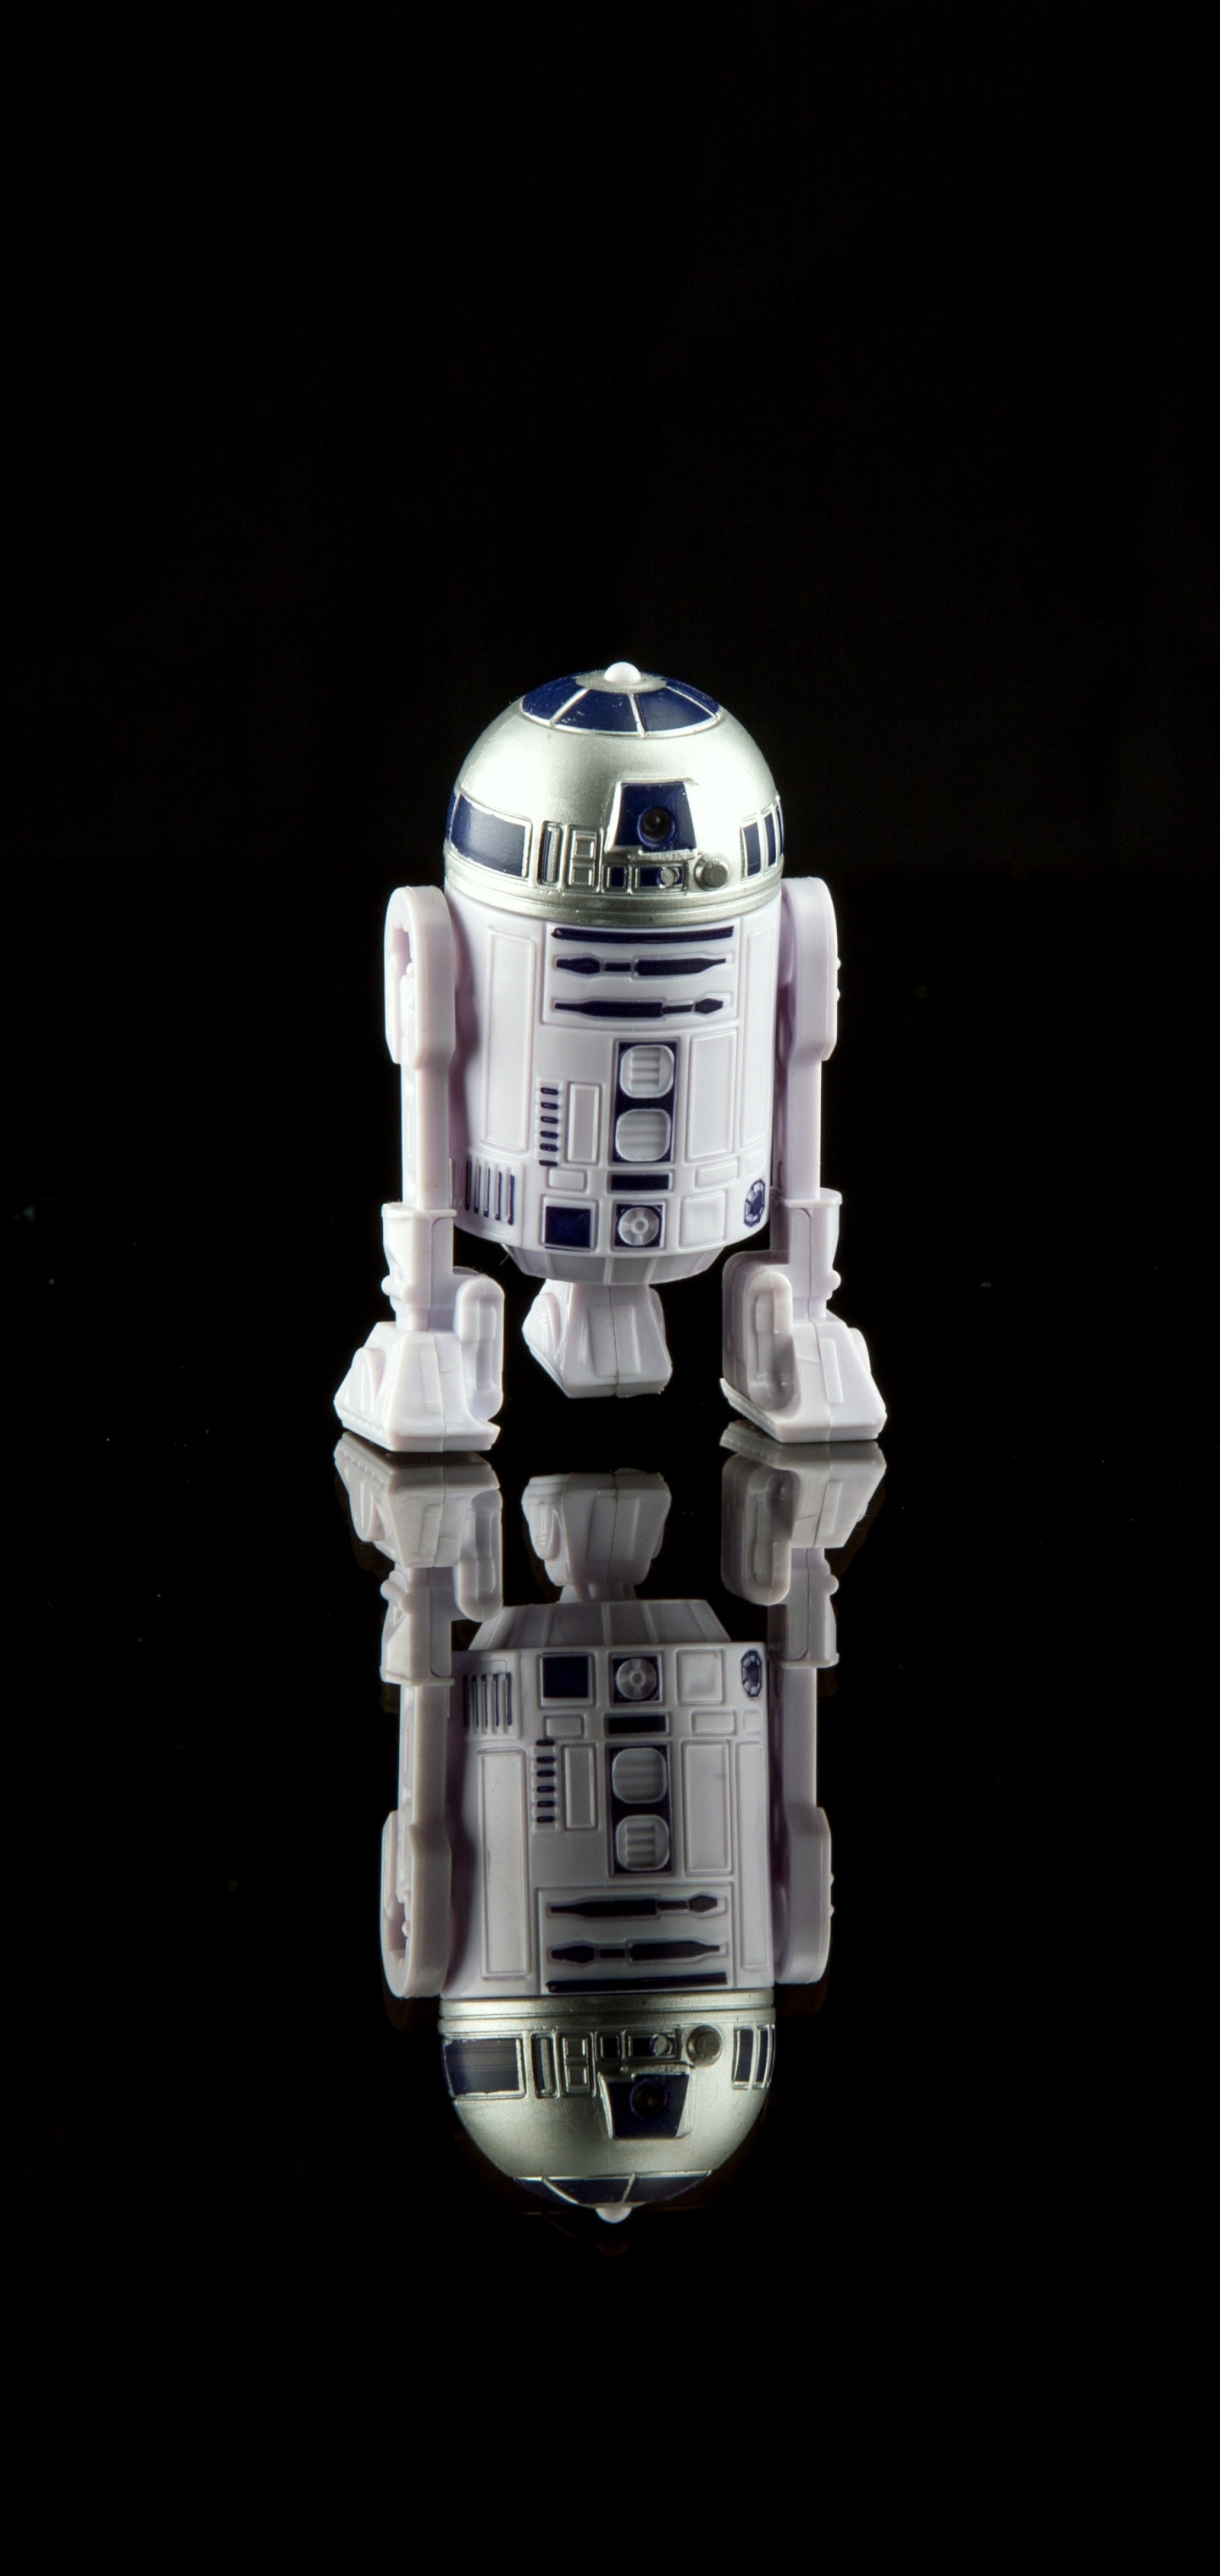 man made, toy, reflection, minimalist, star wars, droid, r2 d2 wallpaper for mobile